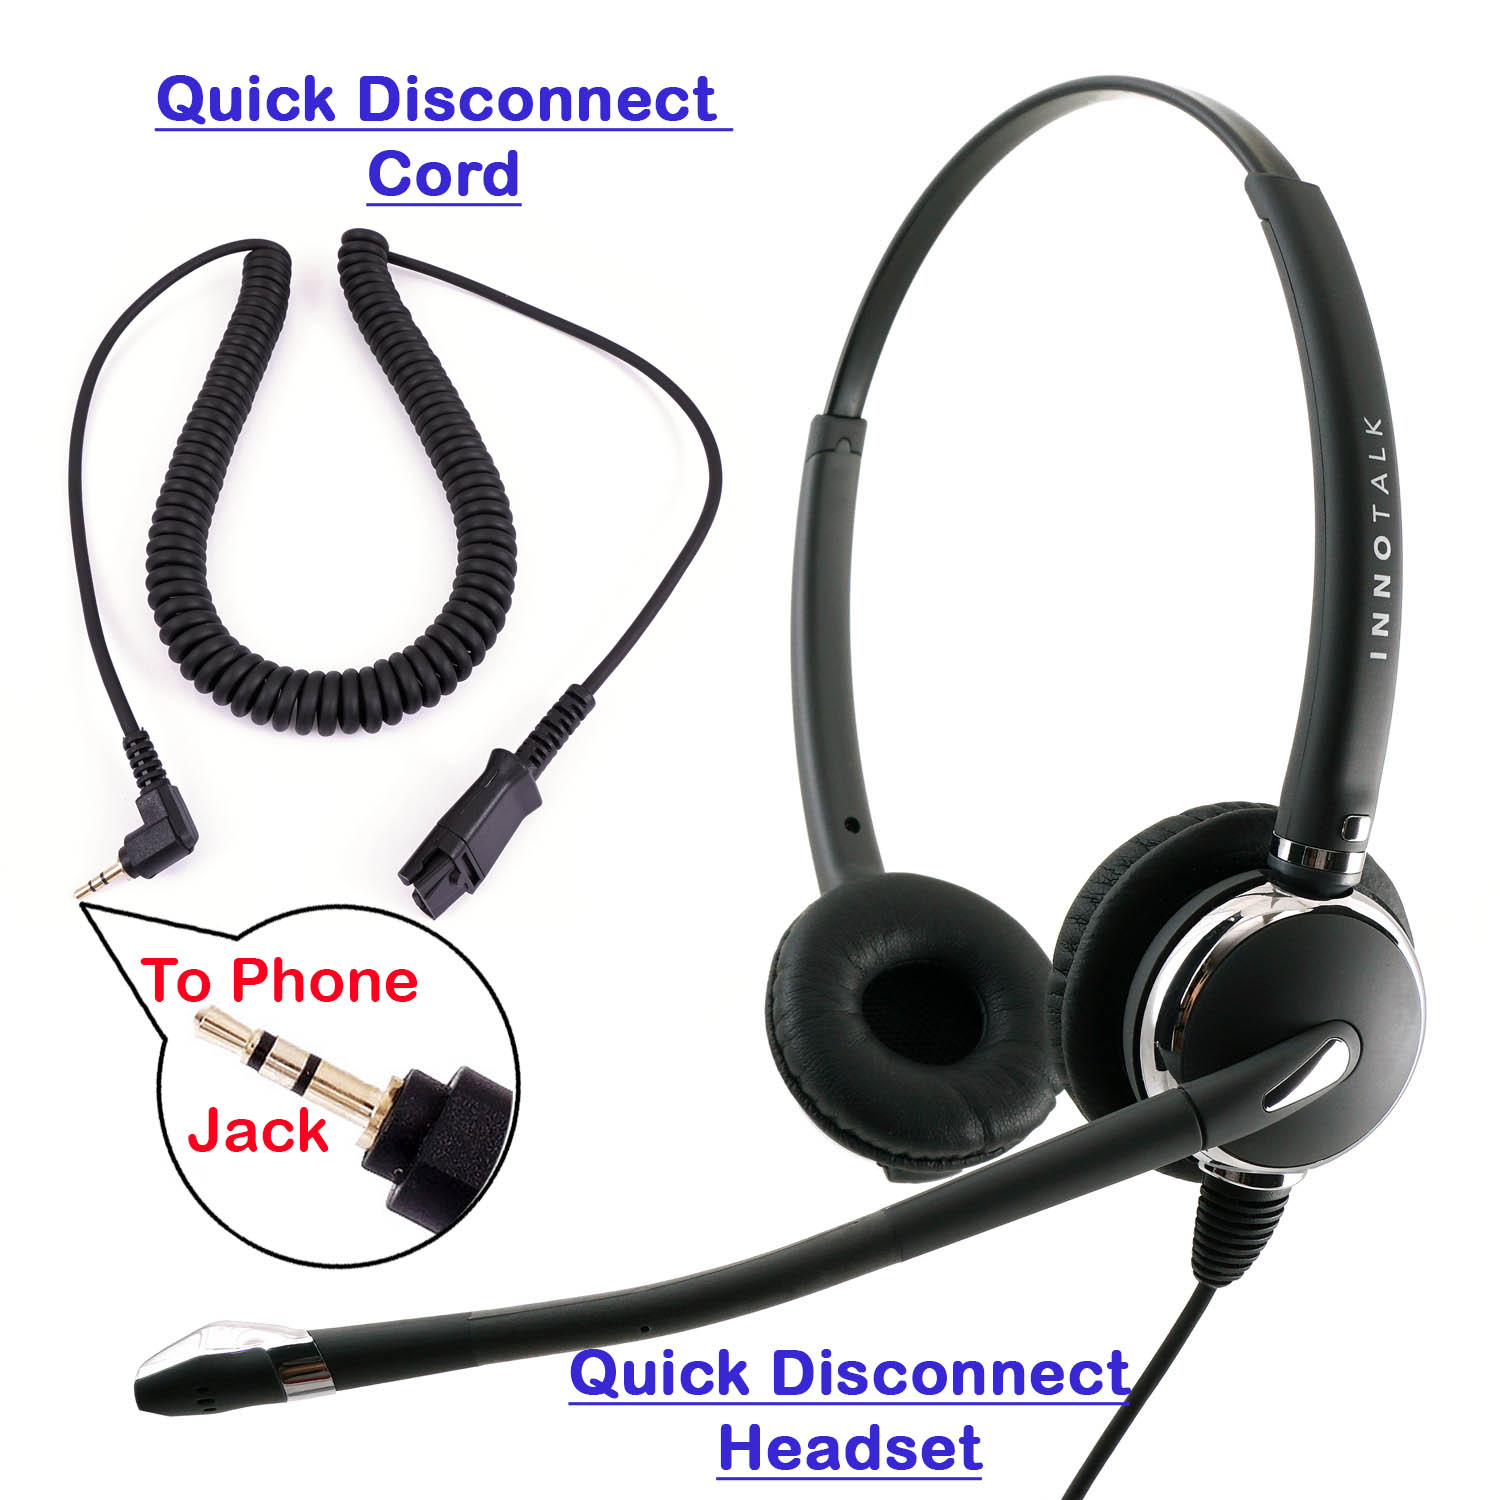 Plantronics Compatible QD 2.5mm Headset Combo - Best Pro Binaural Headset + 2.5 mm headset jack as Office Headset - image 1 of 7